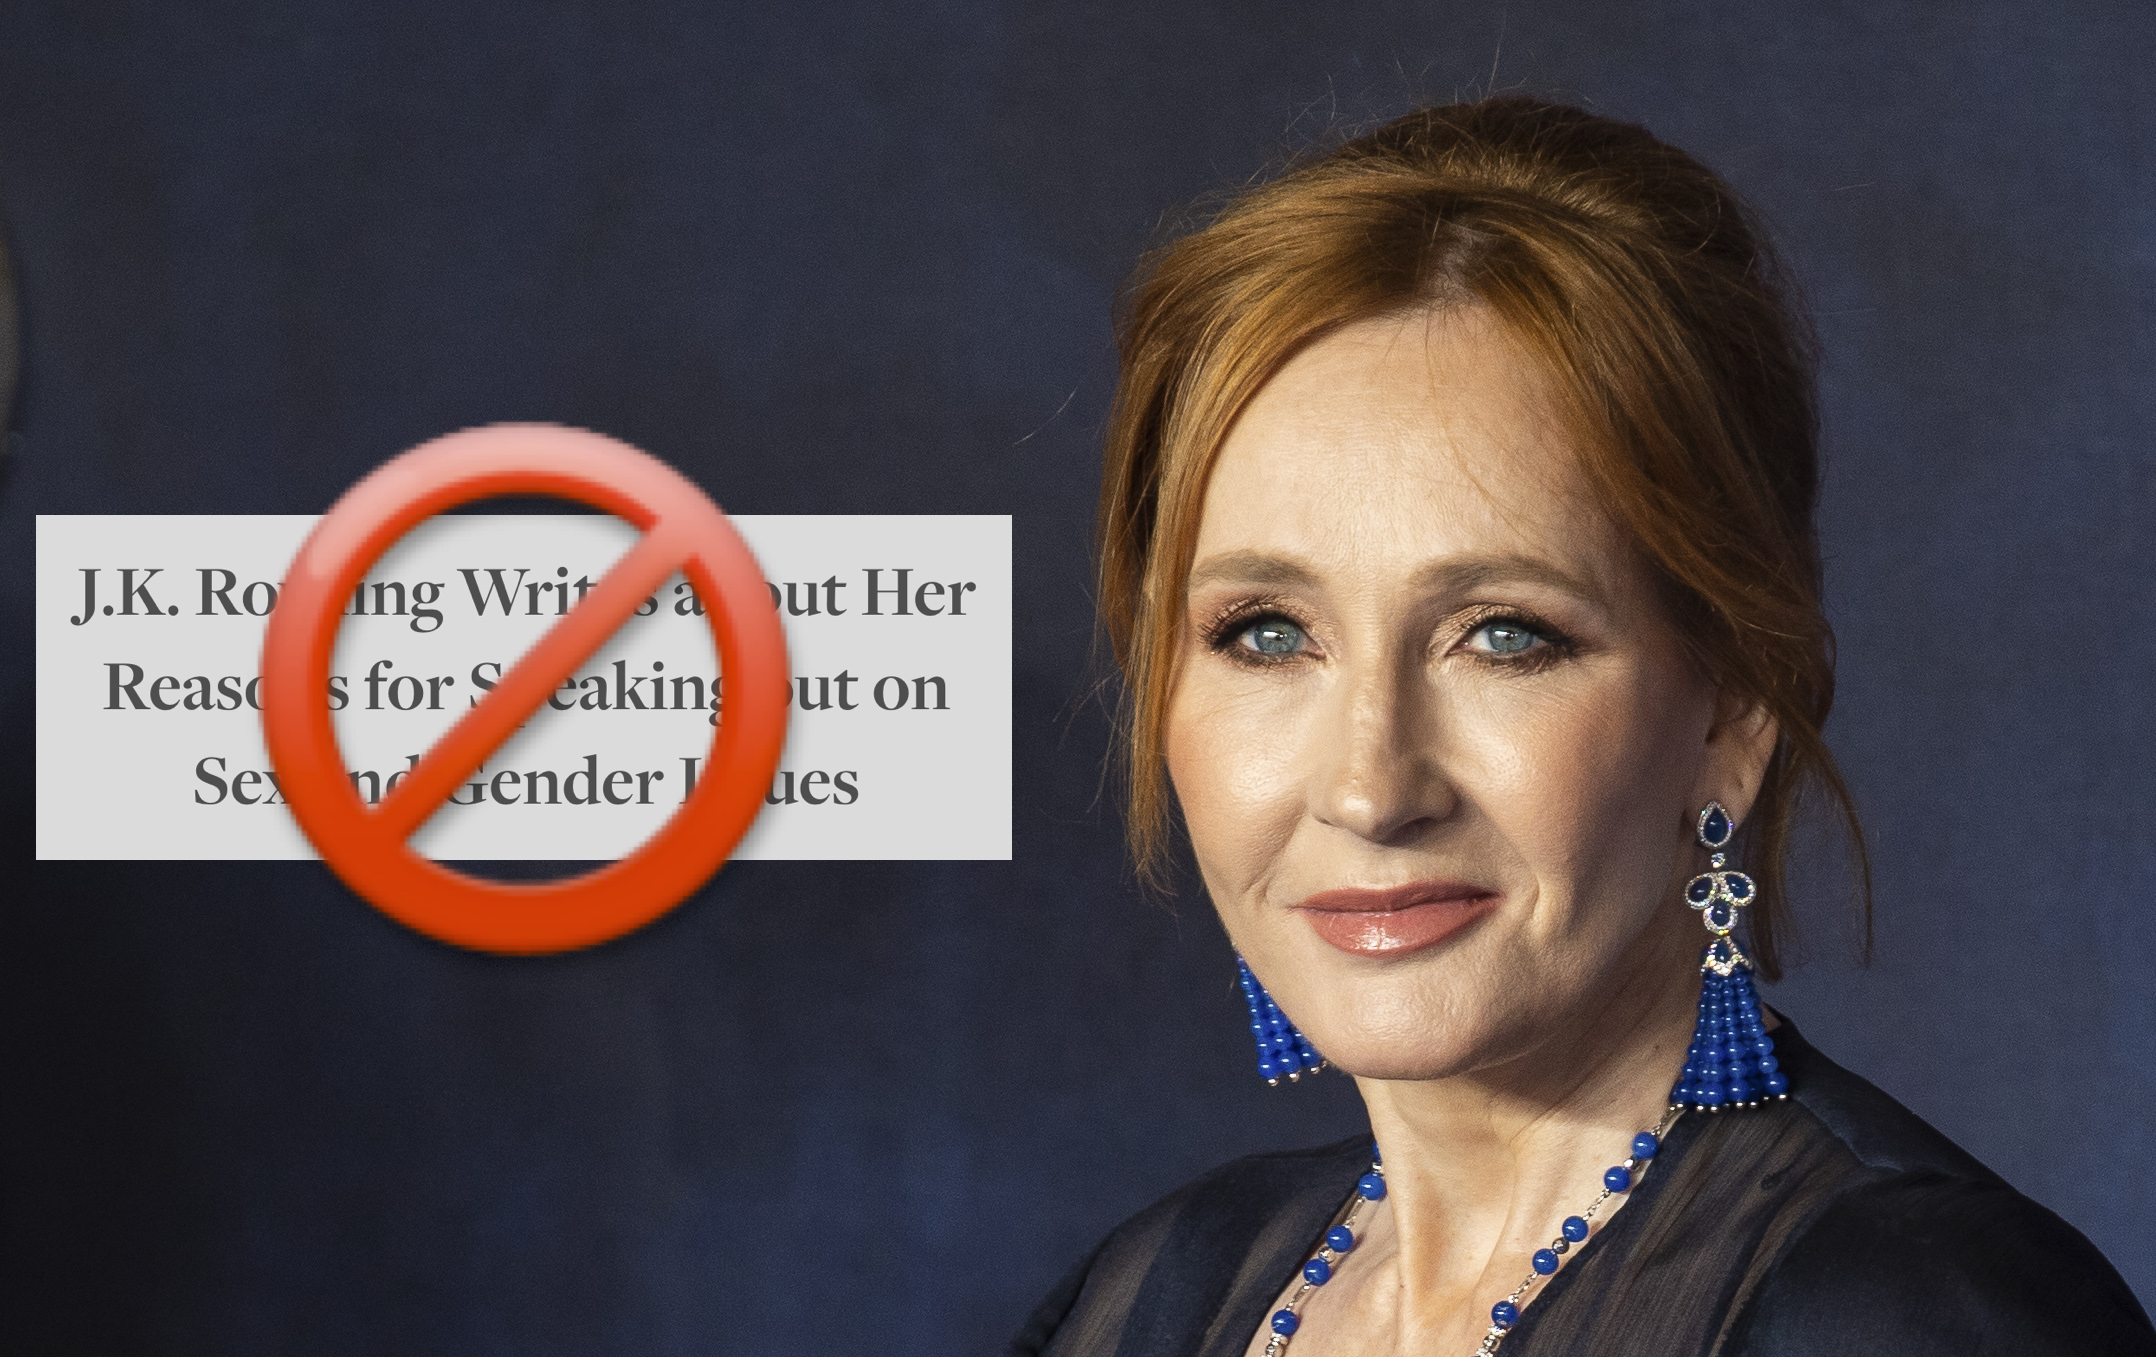 Here’s An Aussie Trans Activist Debunking J.K. Rowling’s Weirdest And Most Harmful Claims